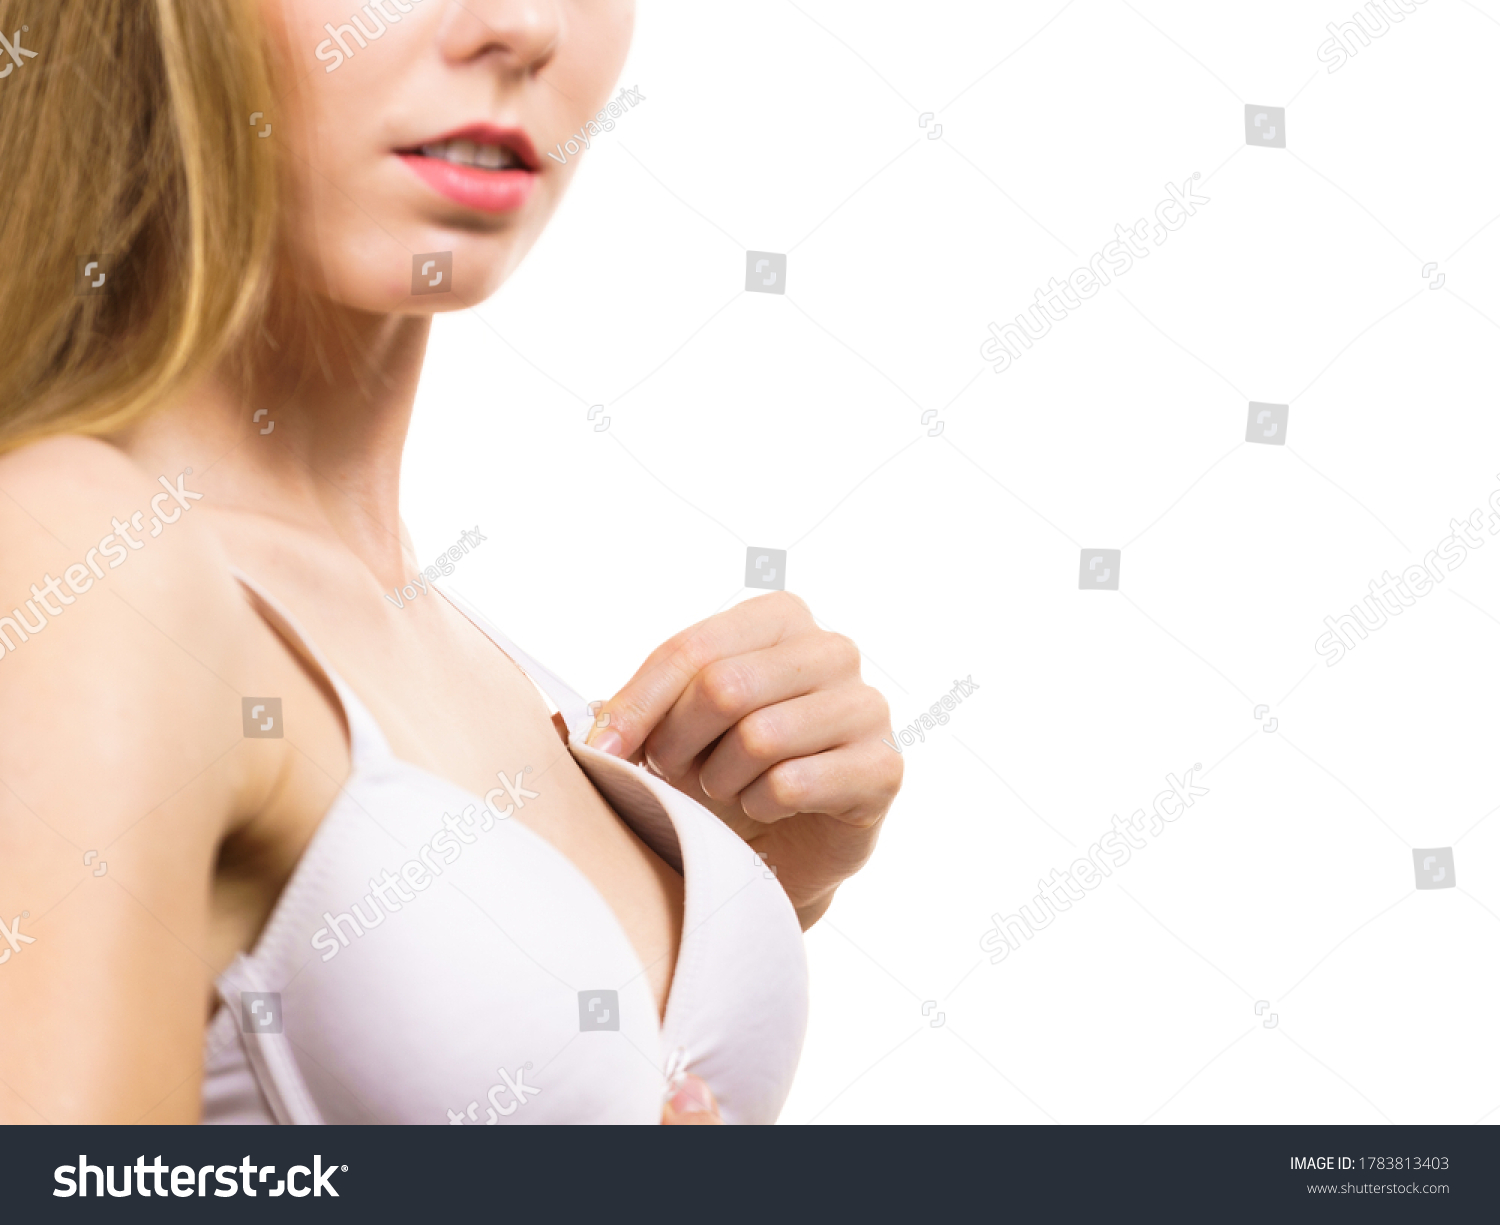 Girl With Small Tits